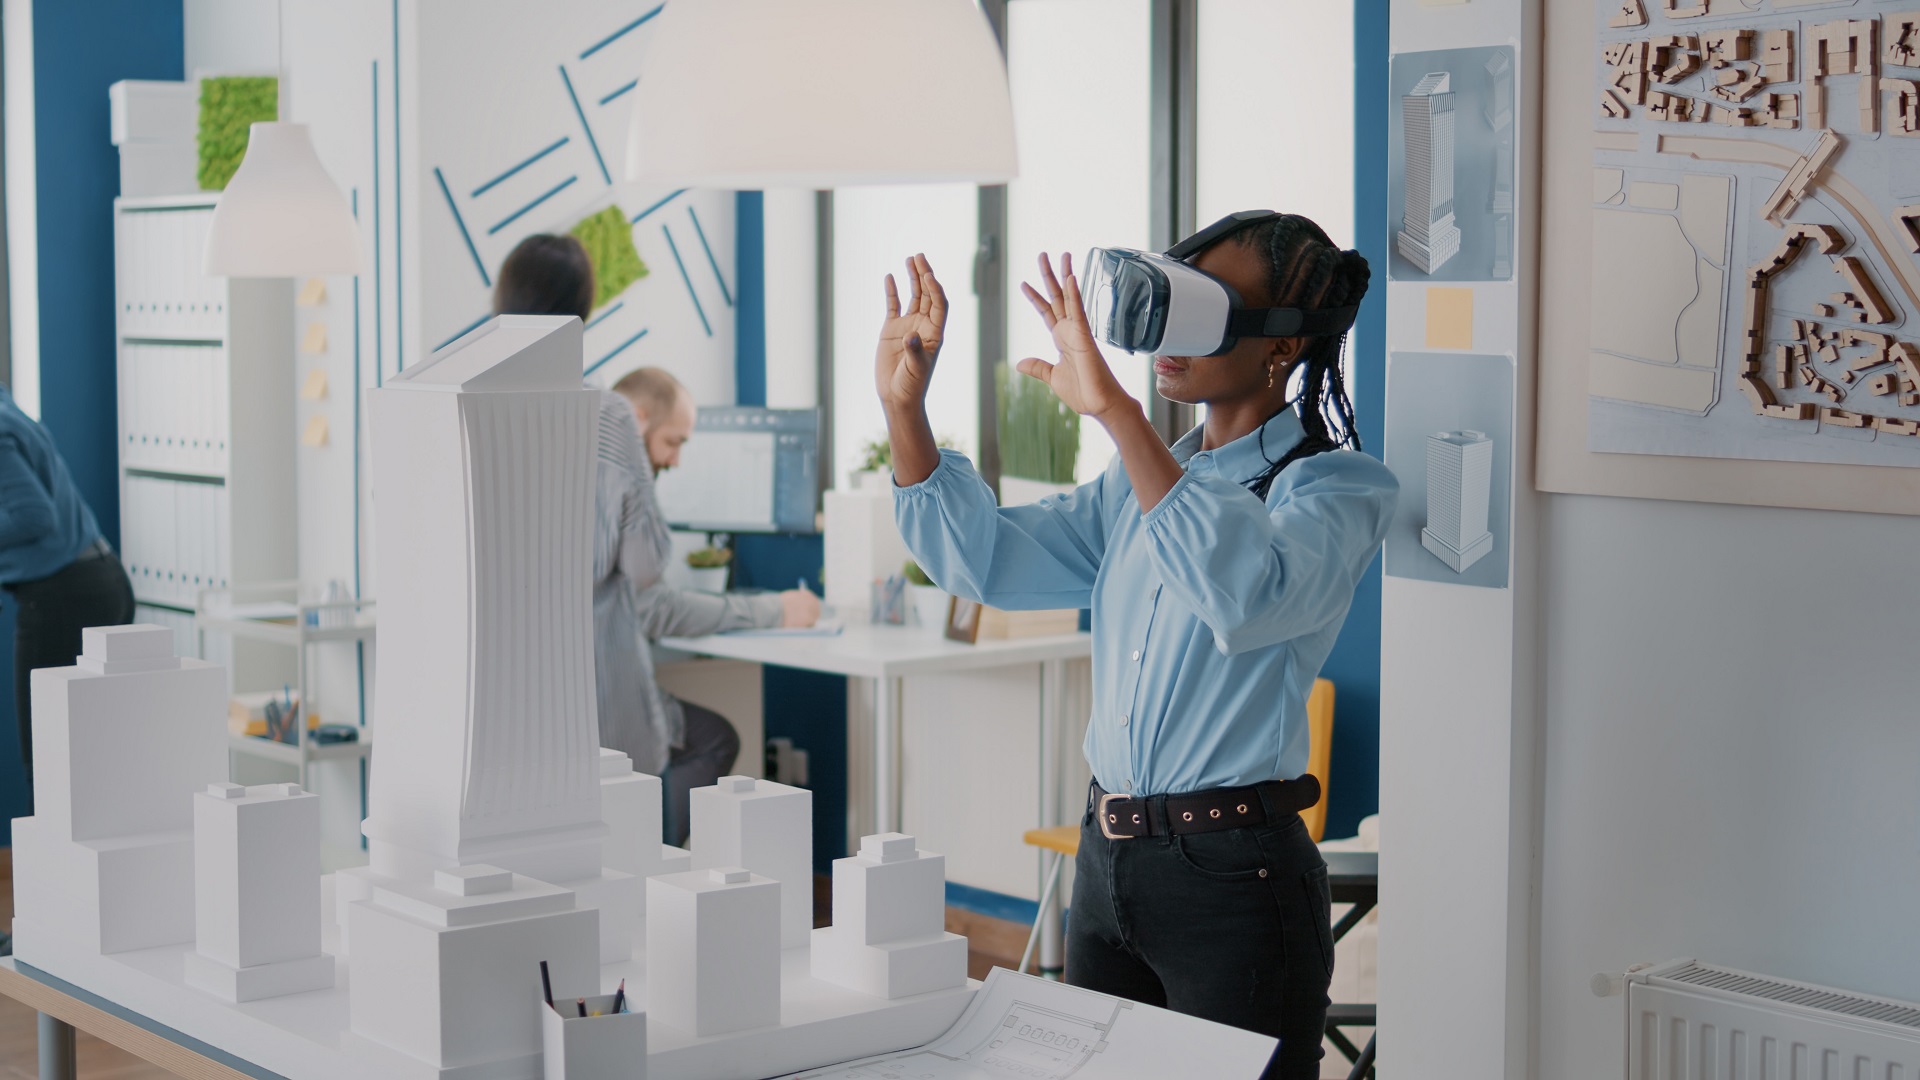 The BIM model in Virtual Reality and Augmented Reality